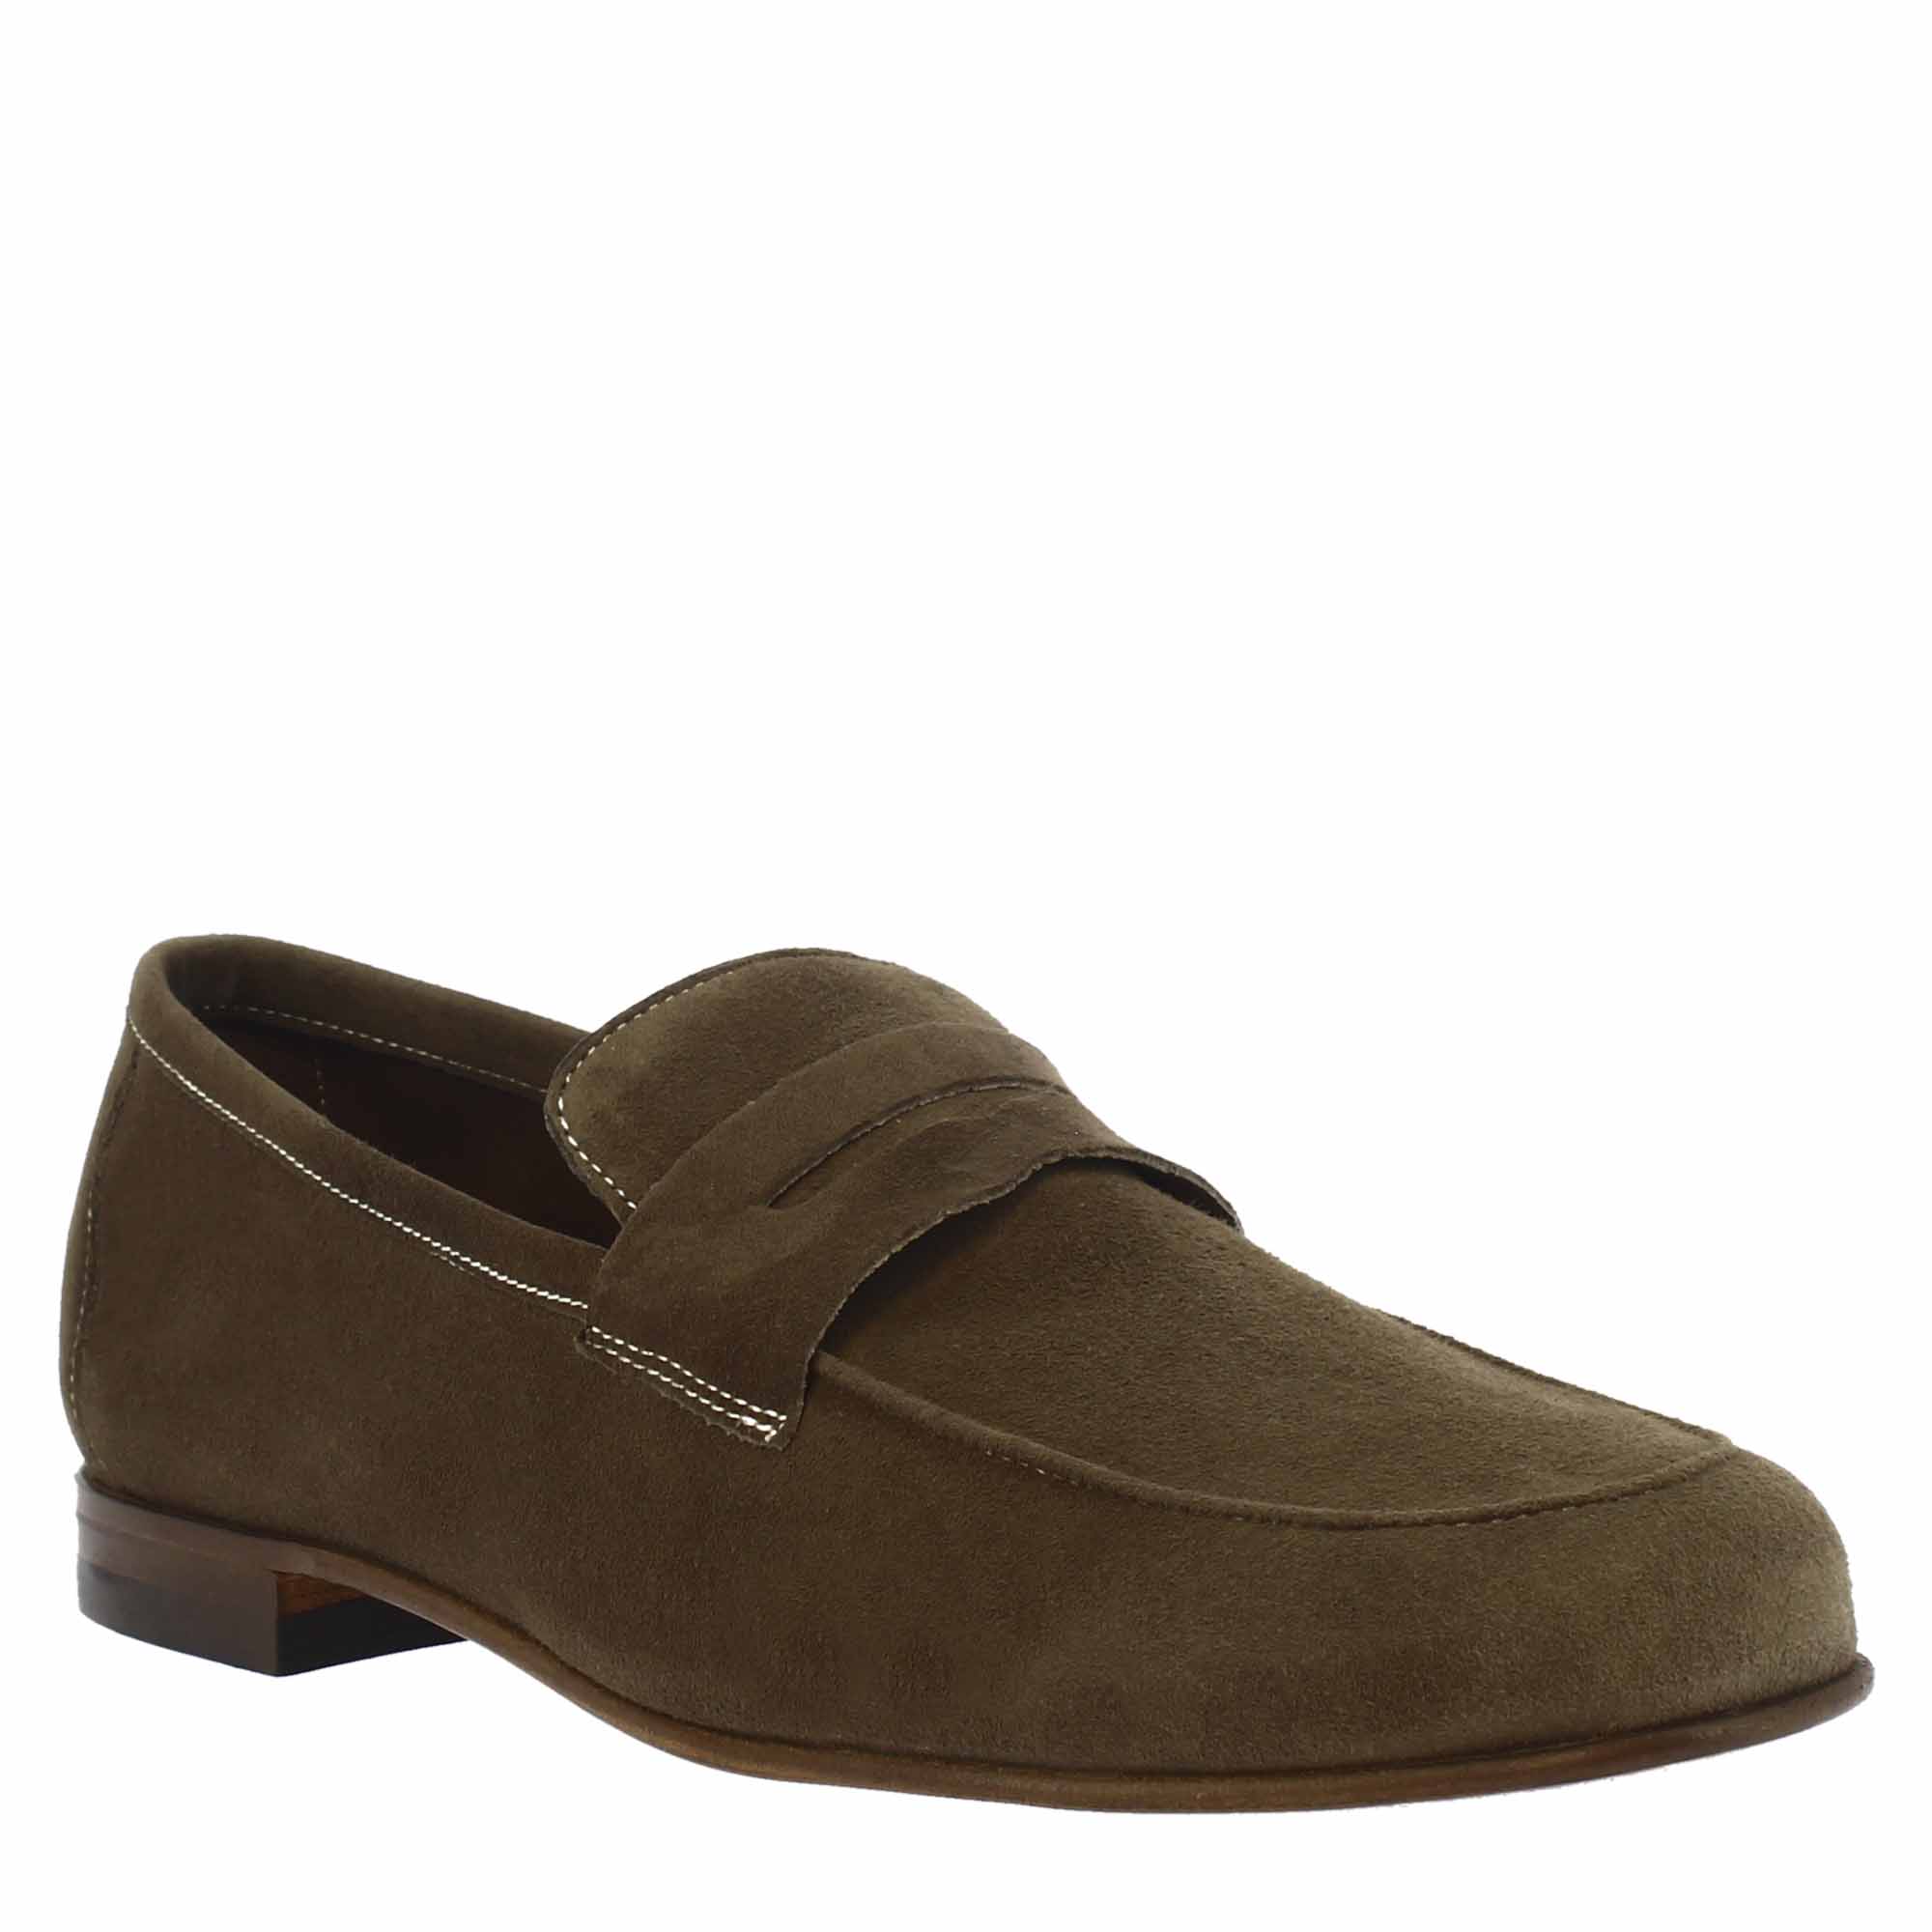 Men's slip-on loafers in taupe suede leather